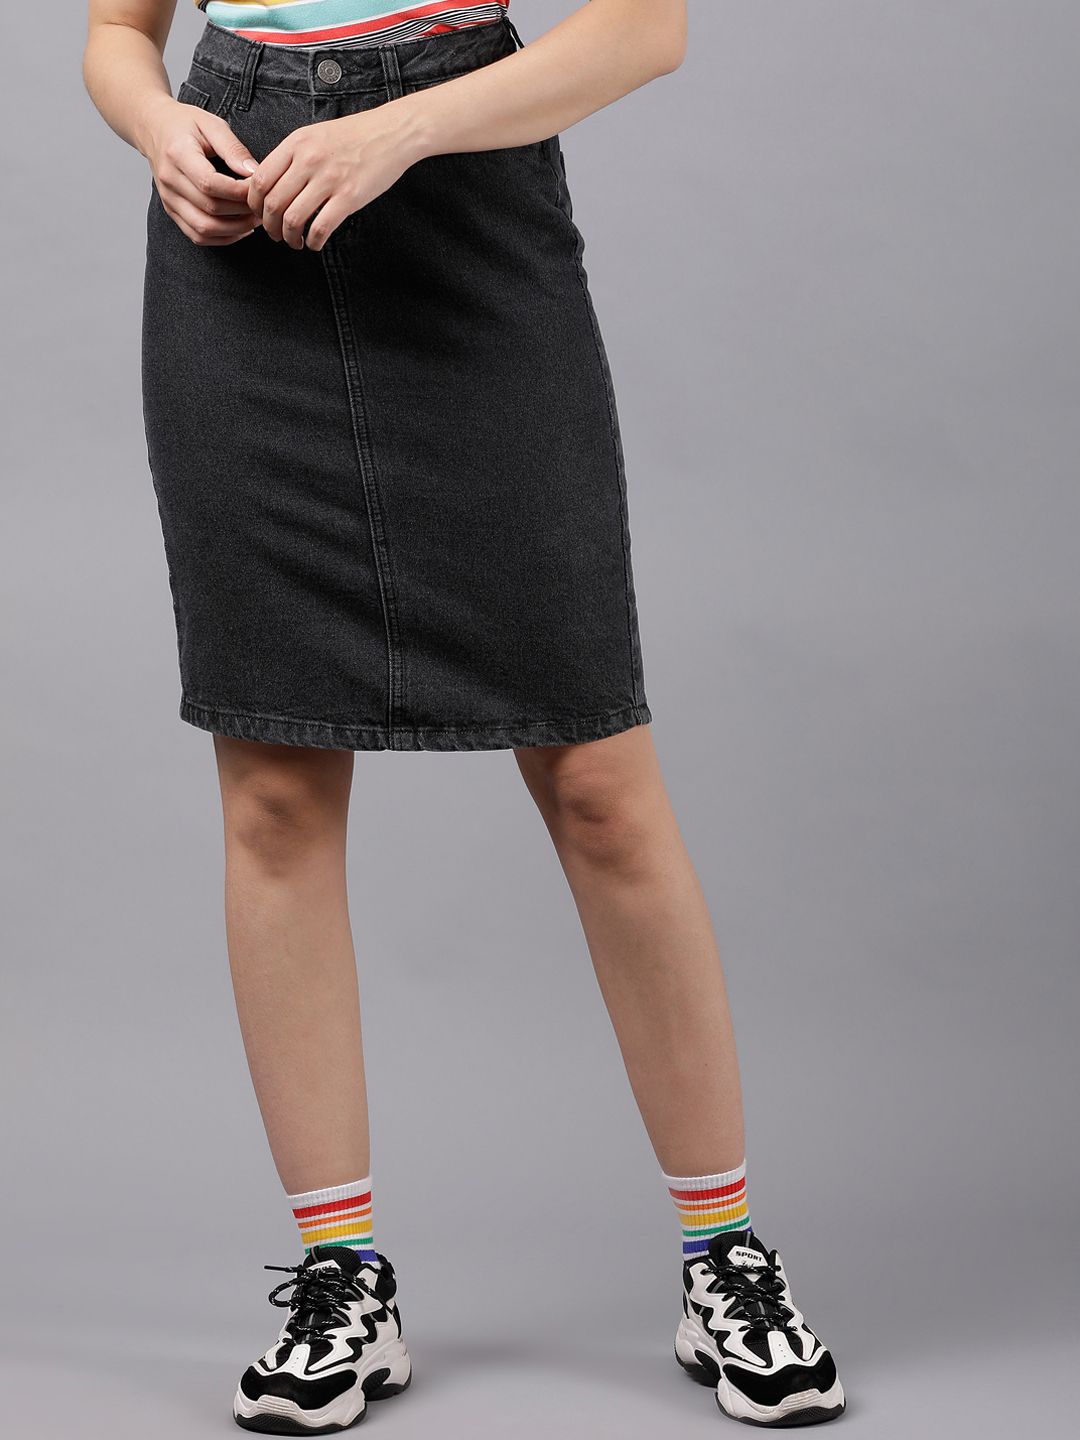 Tokyo Talkies Charcoal Grey Straight Denim Pure Cotton Knee-Length Skirt Price in India